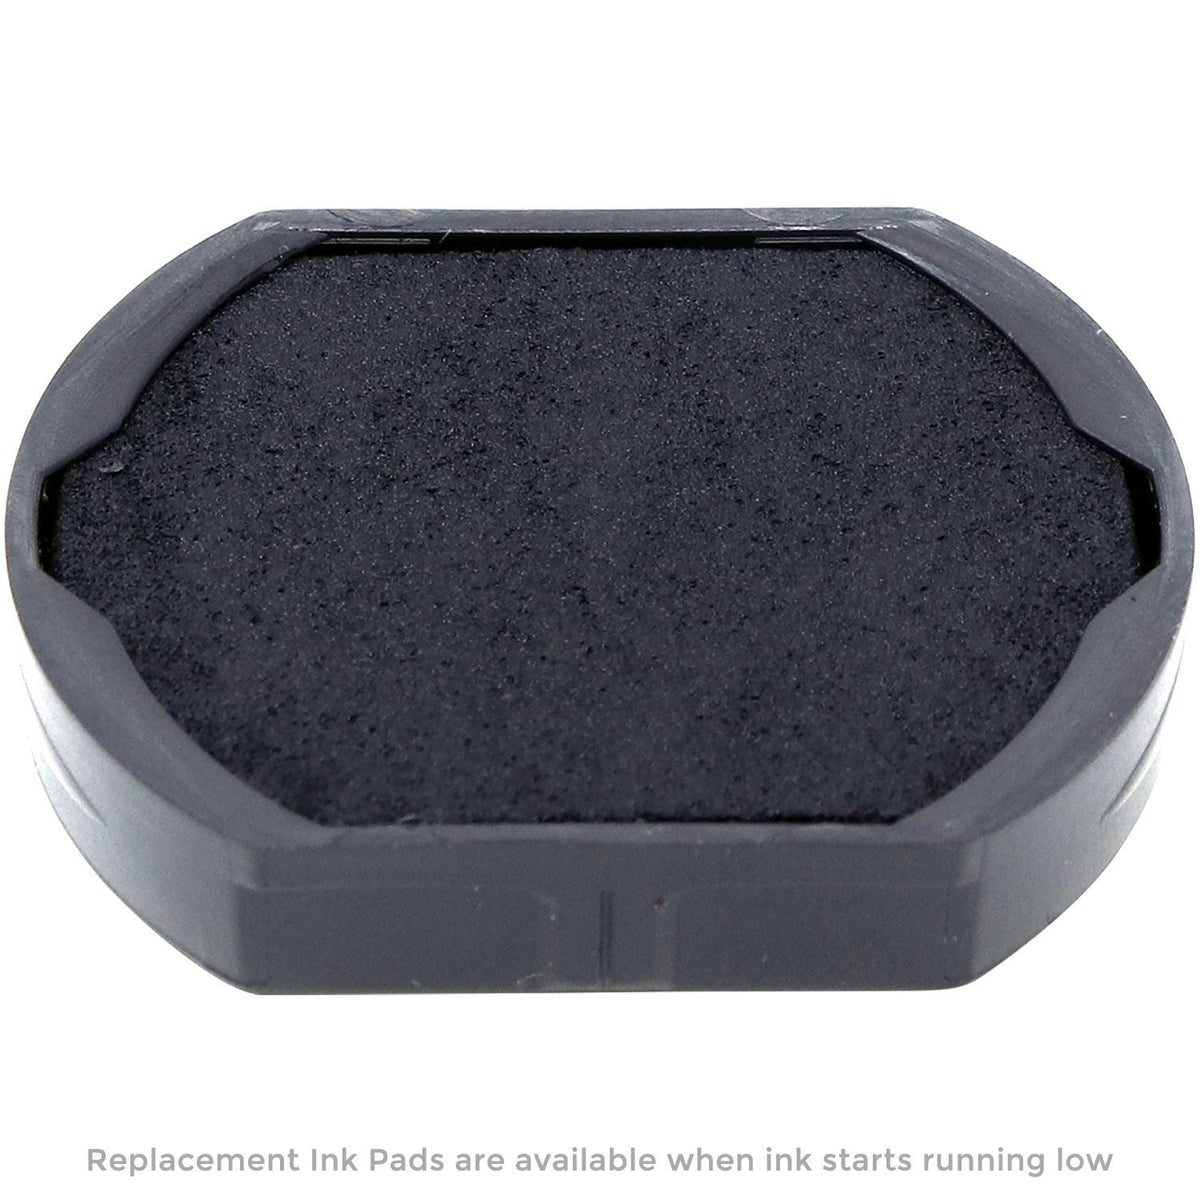 Replacement Pad for Self-Inking Round Entered Entered Stamp